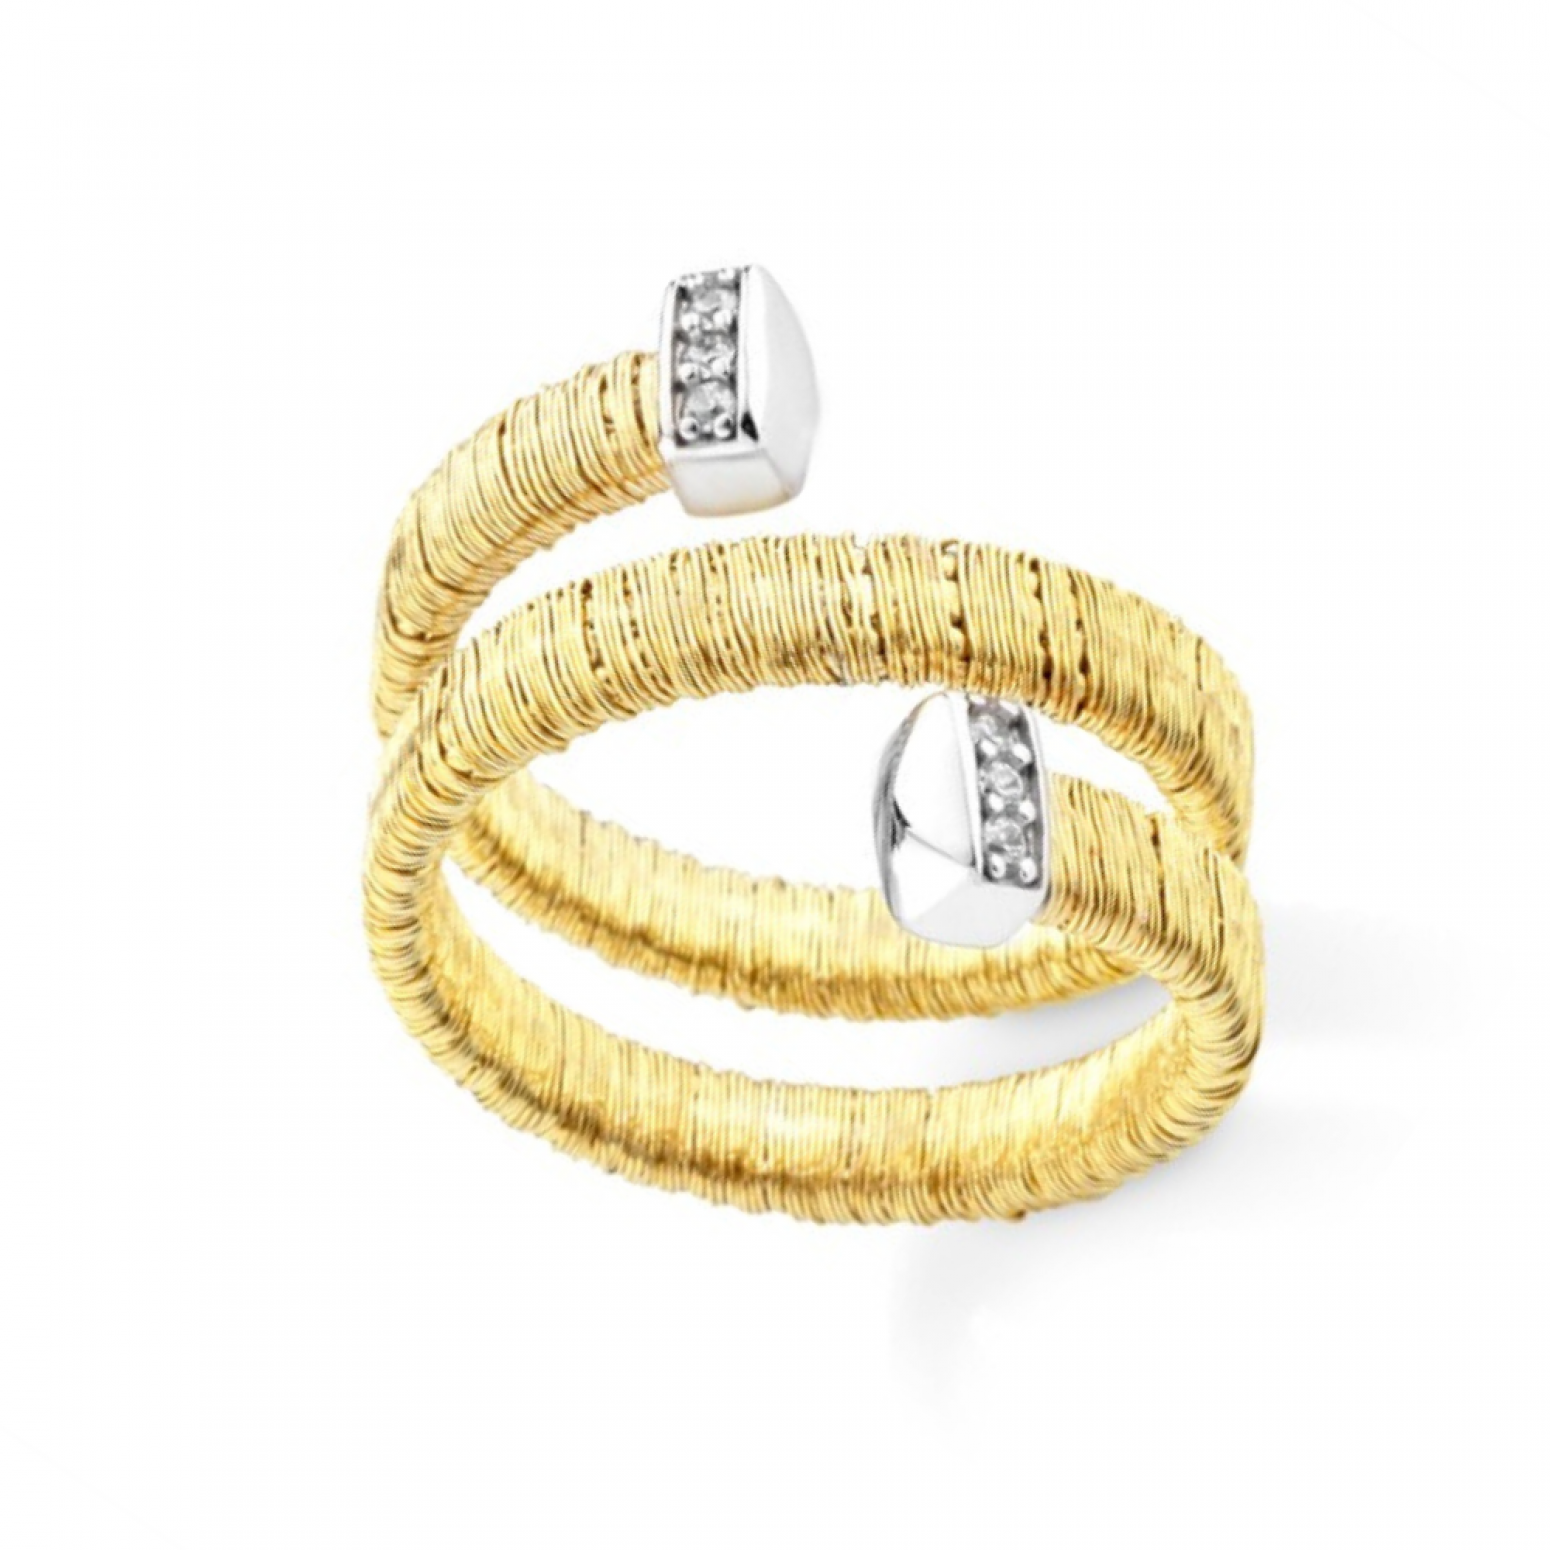 Marcello Pane ring with gold plated silver and zircon, ANCC 007, da4335 RINGS Κοσμηματα - chrilia.gr